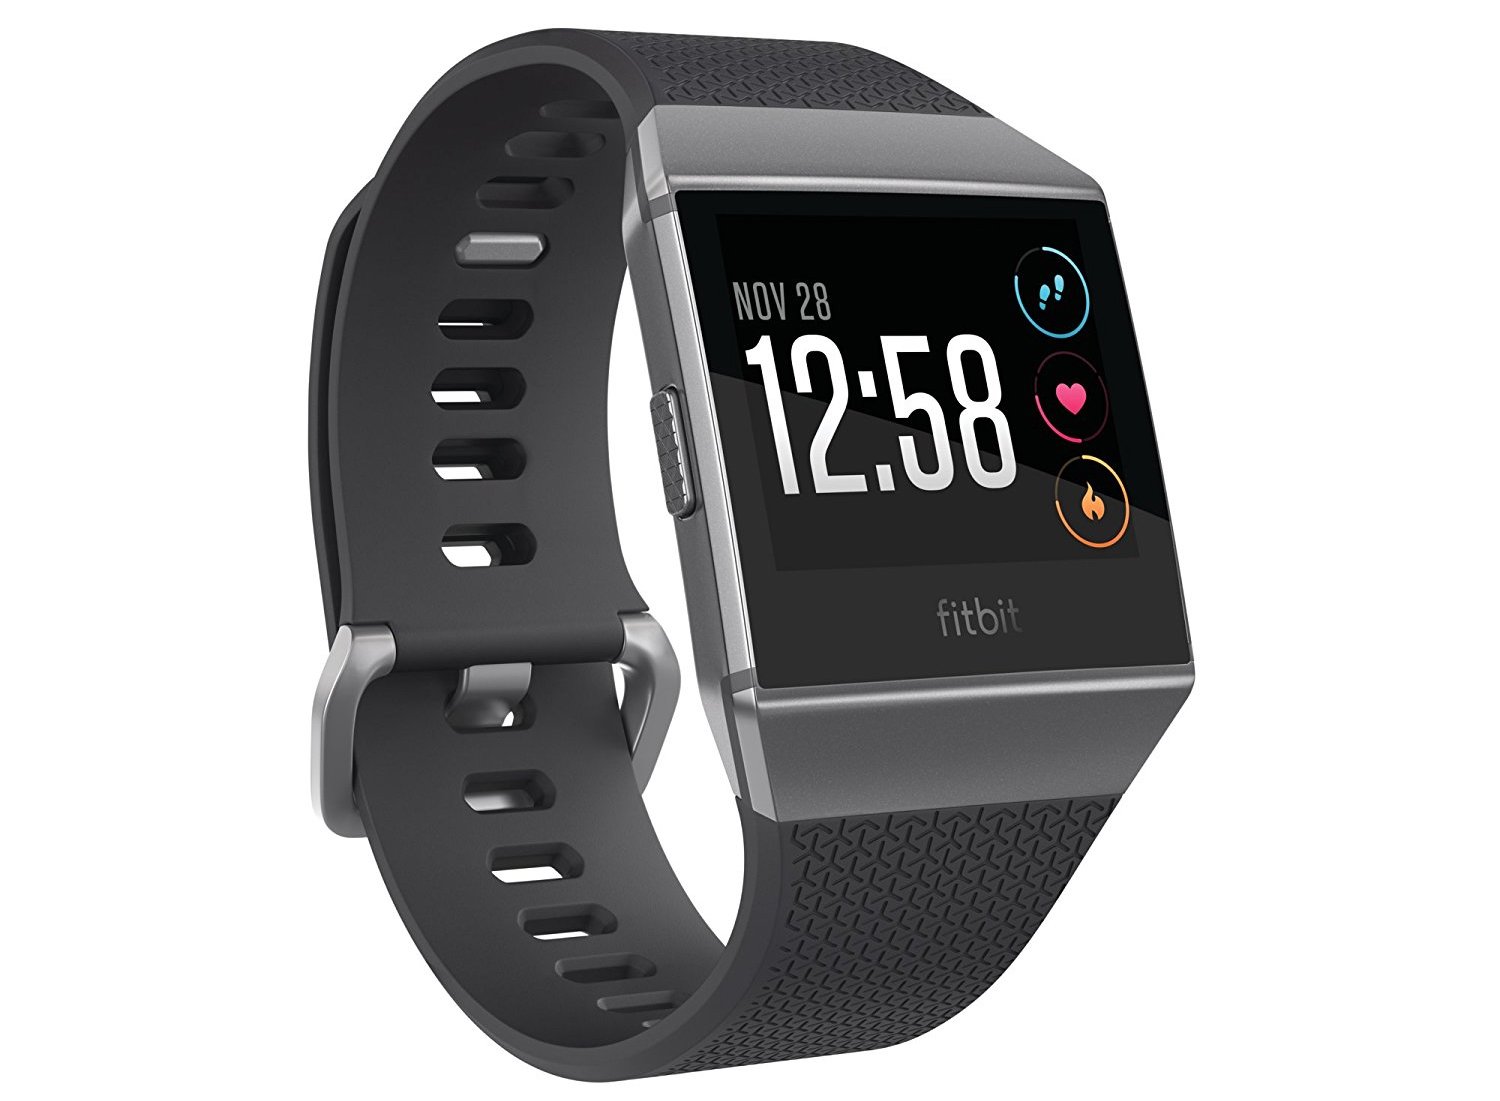 Fitbit Ionic takes on Apple Watch